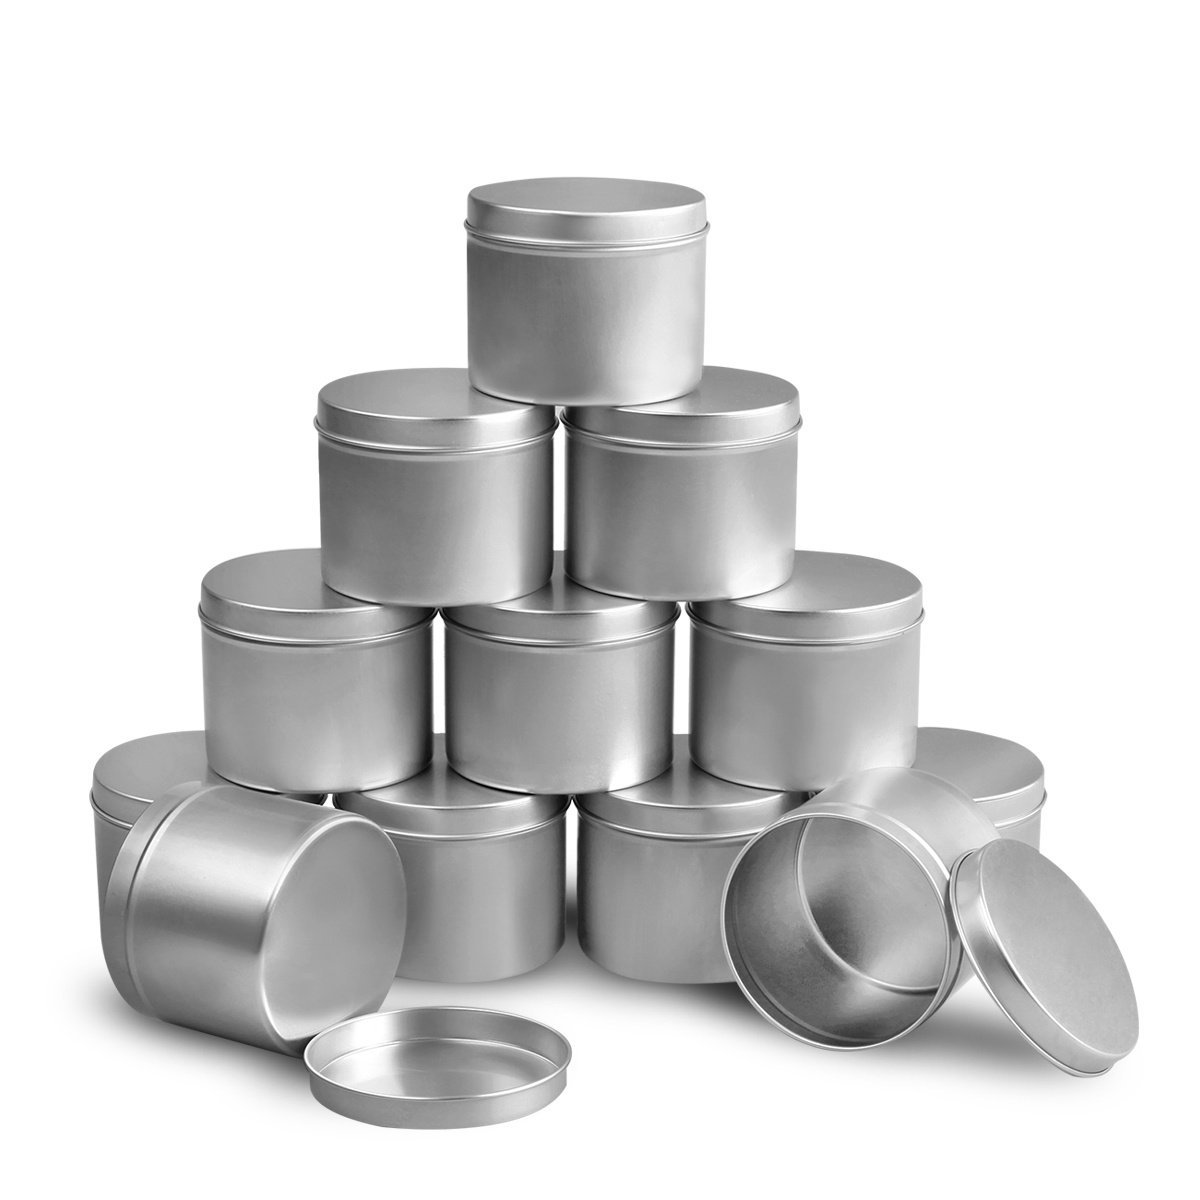 12pcs/set Candle Tins, 4 Oz Candle Containers For Making Candles, Bulk  Candle Jars, DIY Candle Making Tins, Candle Tins With Lids Bulk, For DIY  Candl